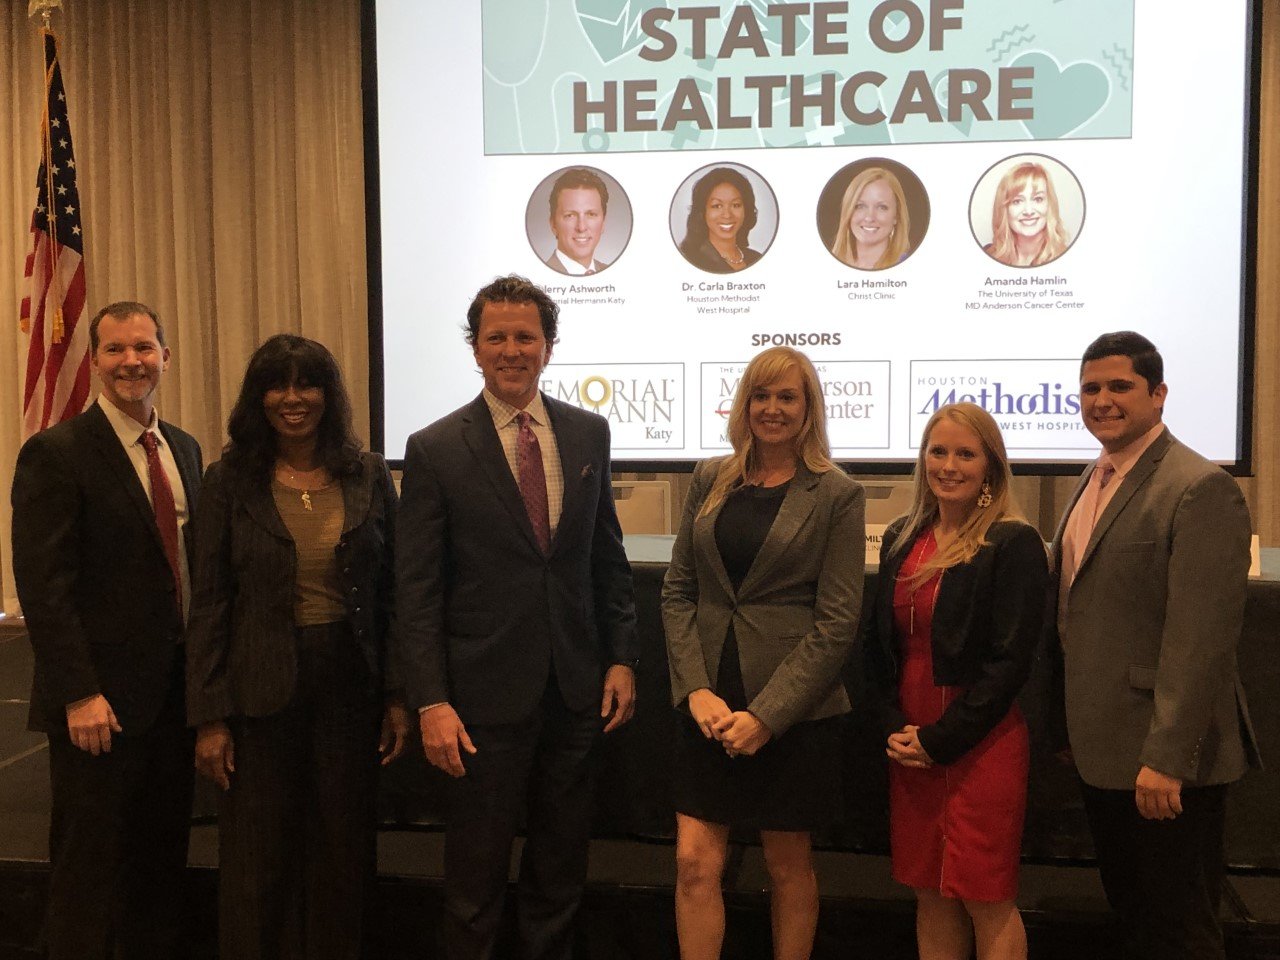 Jason Hodge, Carla Braxton, Jerry Ashworth, Amanda Hamlin, Lara Hamilton, and Matthew Ferraro pose for a picture at the state of healthcare panel discussion, sponsored by the Katy area Chamber of Commerce Nov. 9.